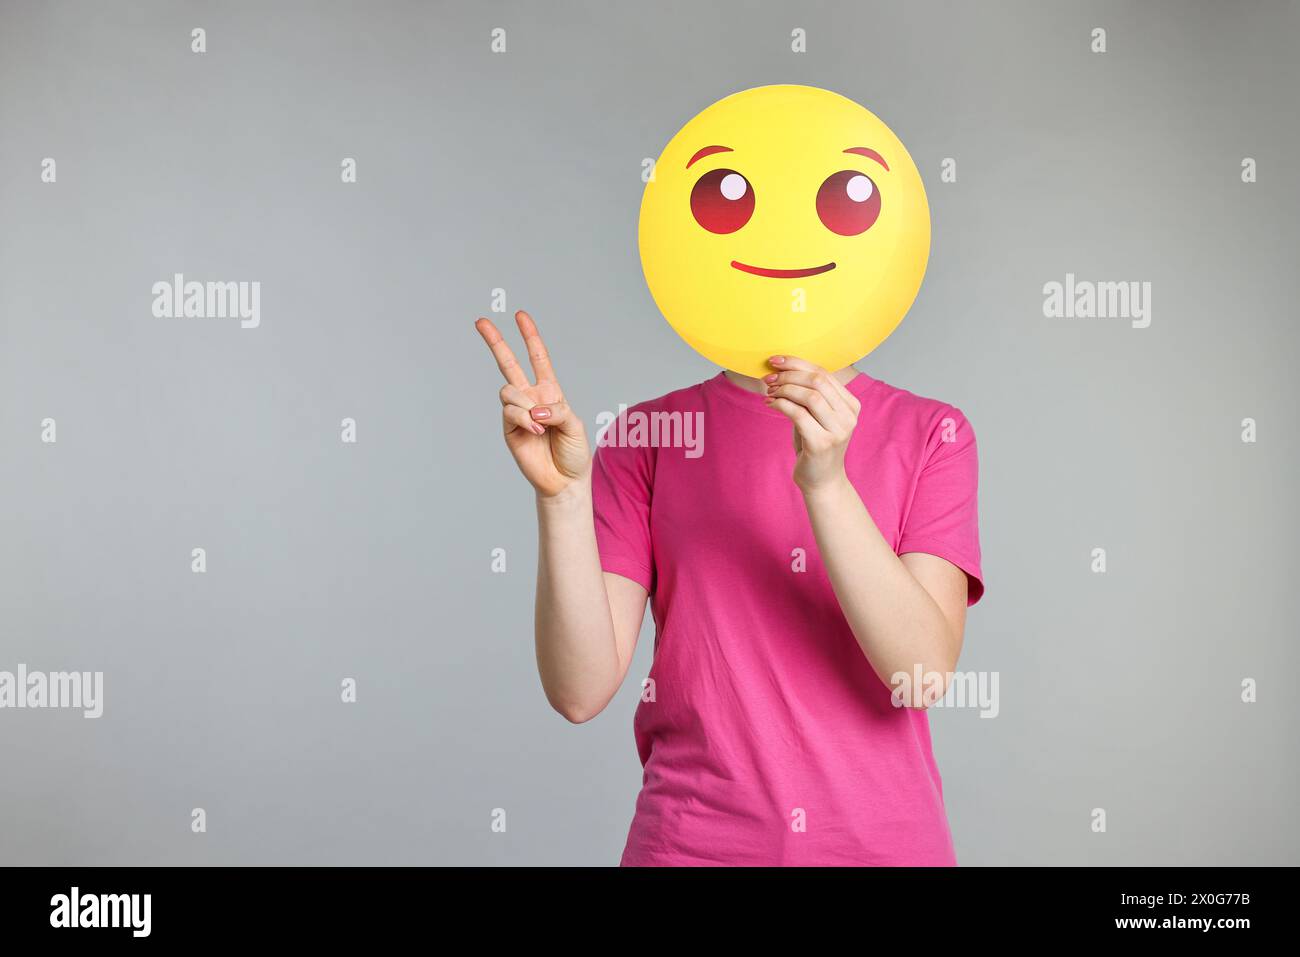 Woman covering face with smiling emoticon and showing peace sign on grey background. Space for text Stock Photo